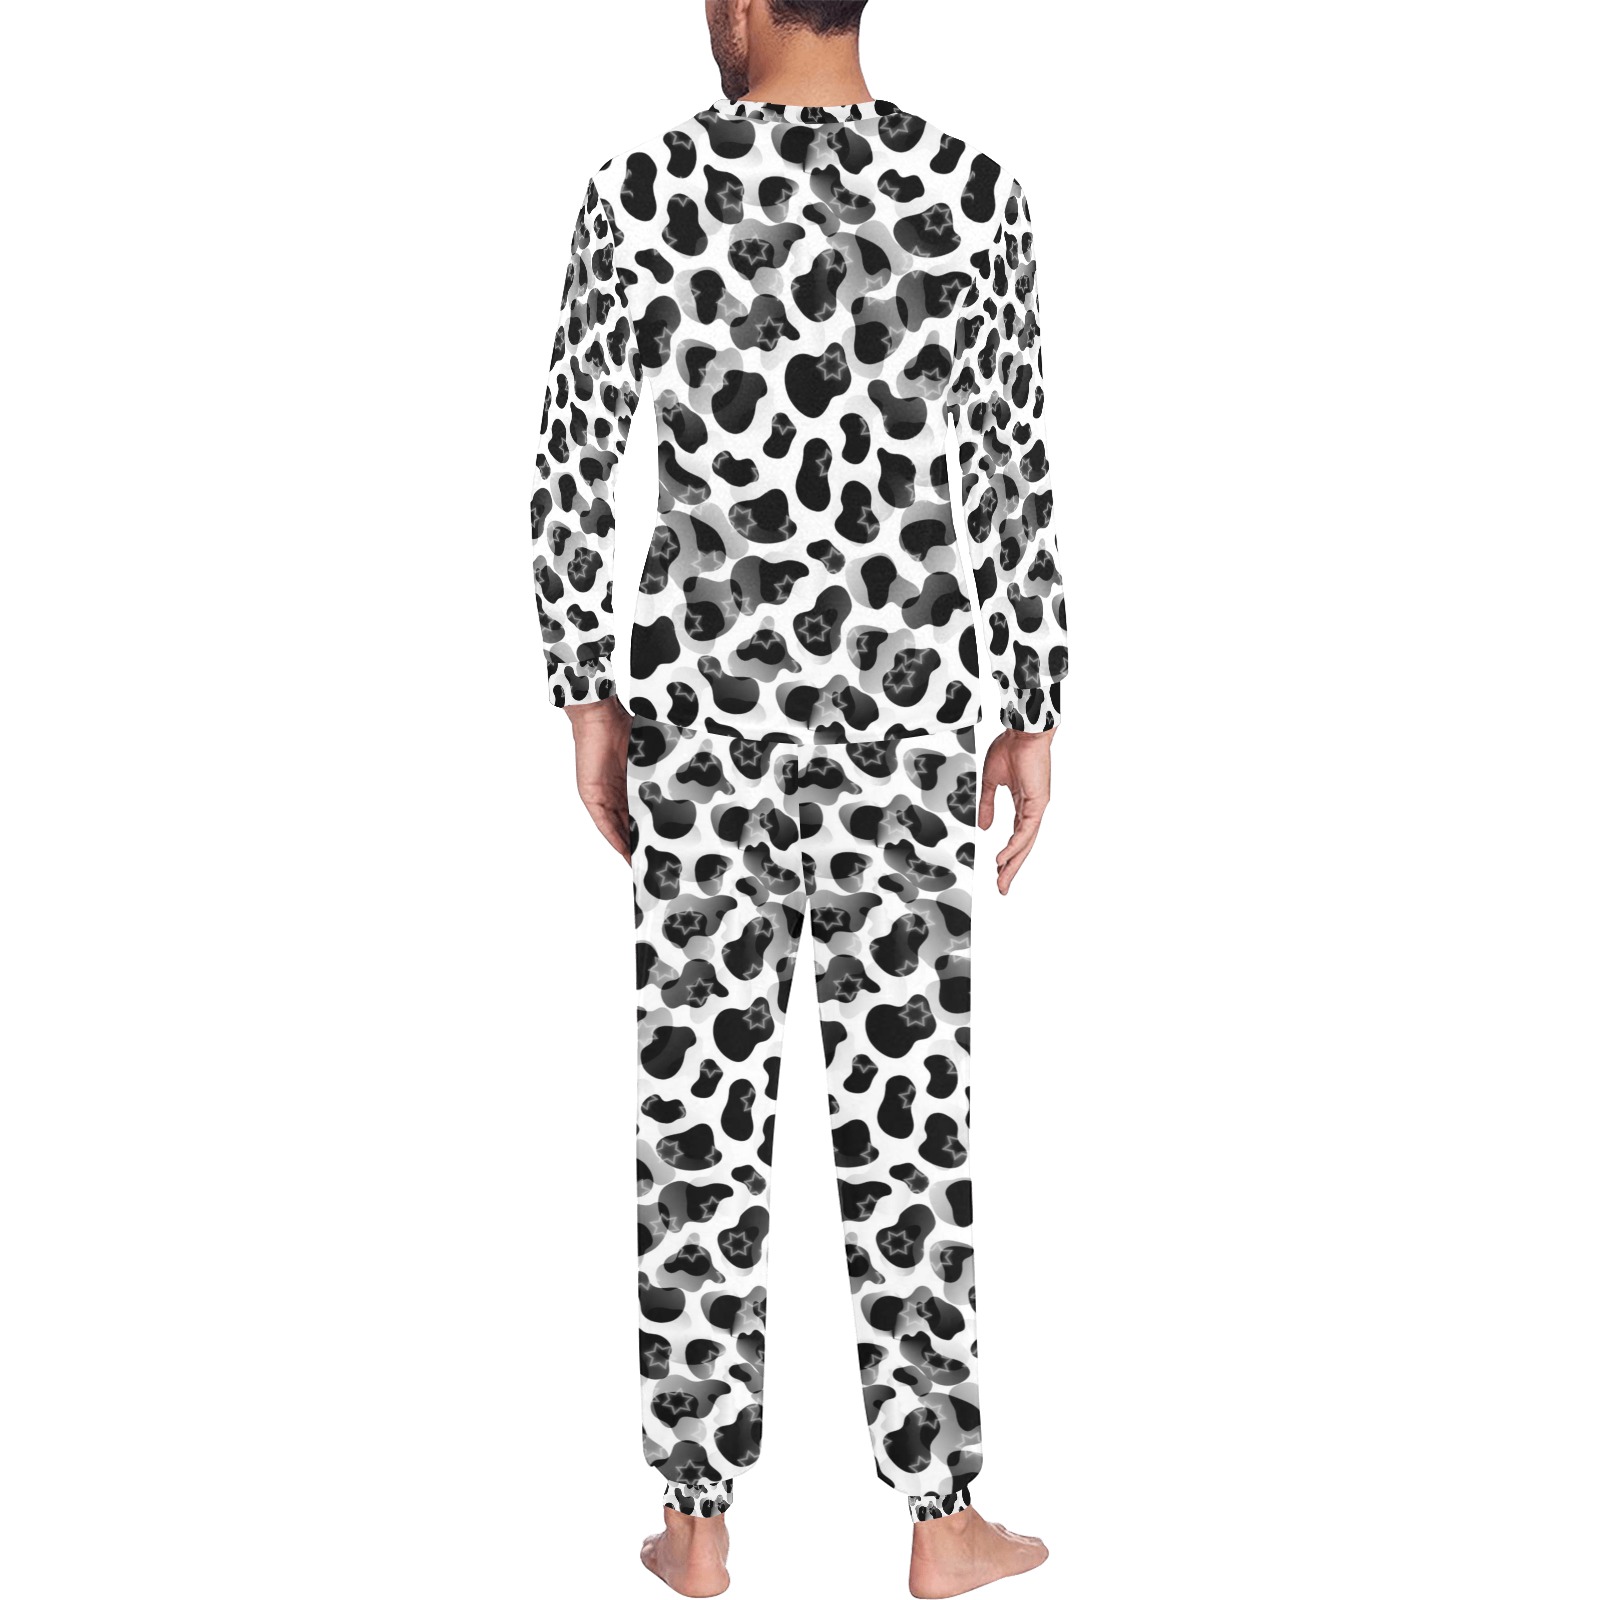 Cowhide by Artdream Men's All Over Print Pajama Set with Custom Cuff